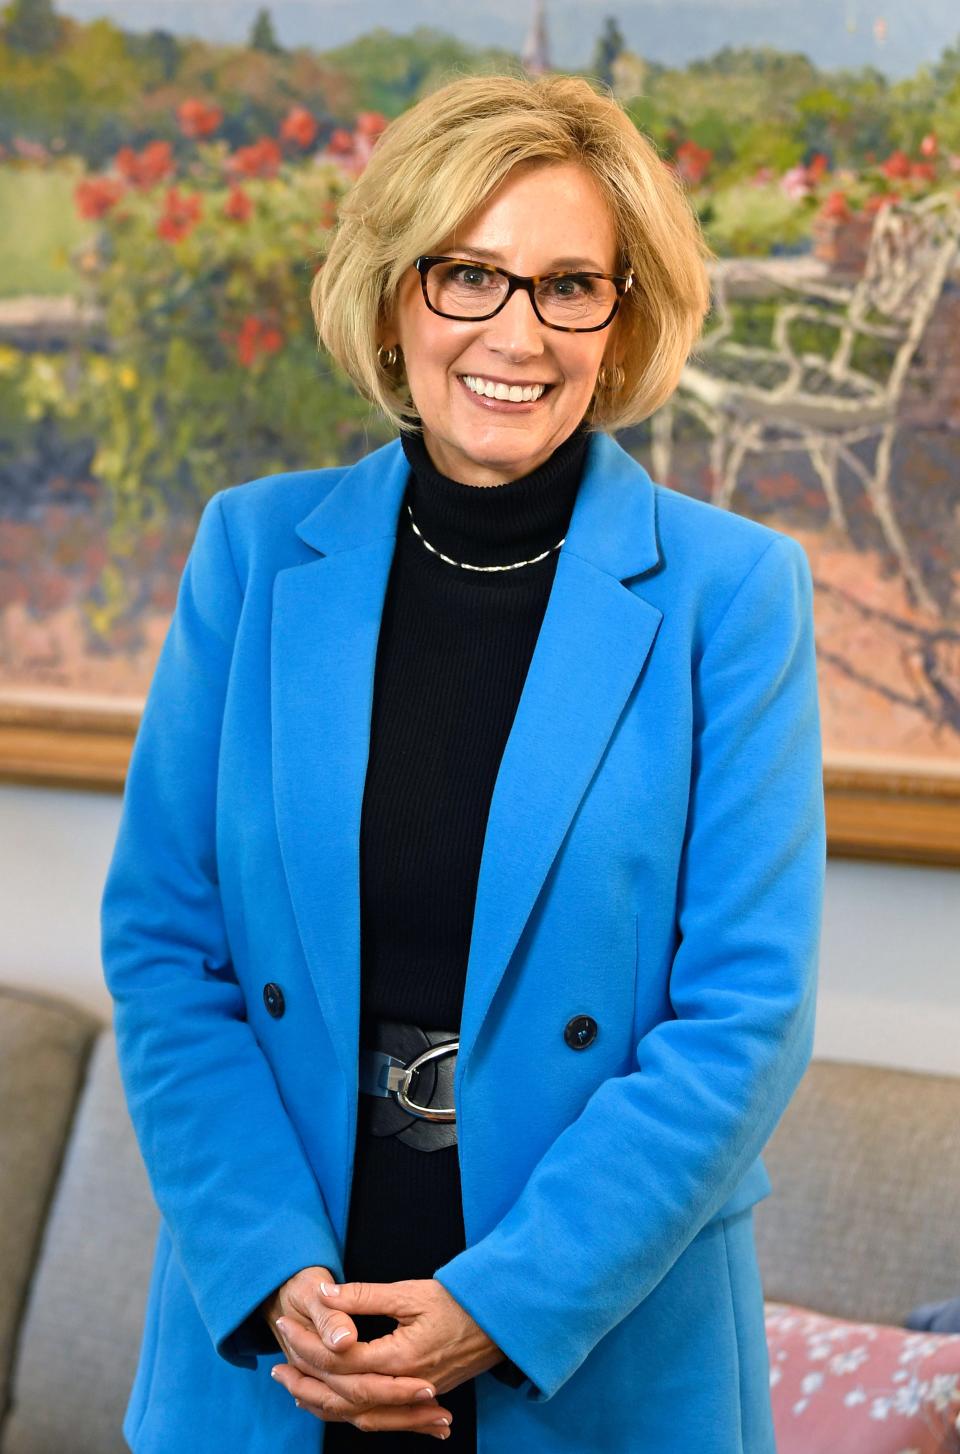 Wendy H. Steele is the author of Invitation to Impact. She is a dedicated philanthropist, passionate entrepreneur and the founder of Impact100 in 2001 to encourage and expand women's roles in the field of philanthropy.